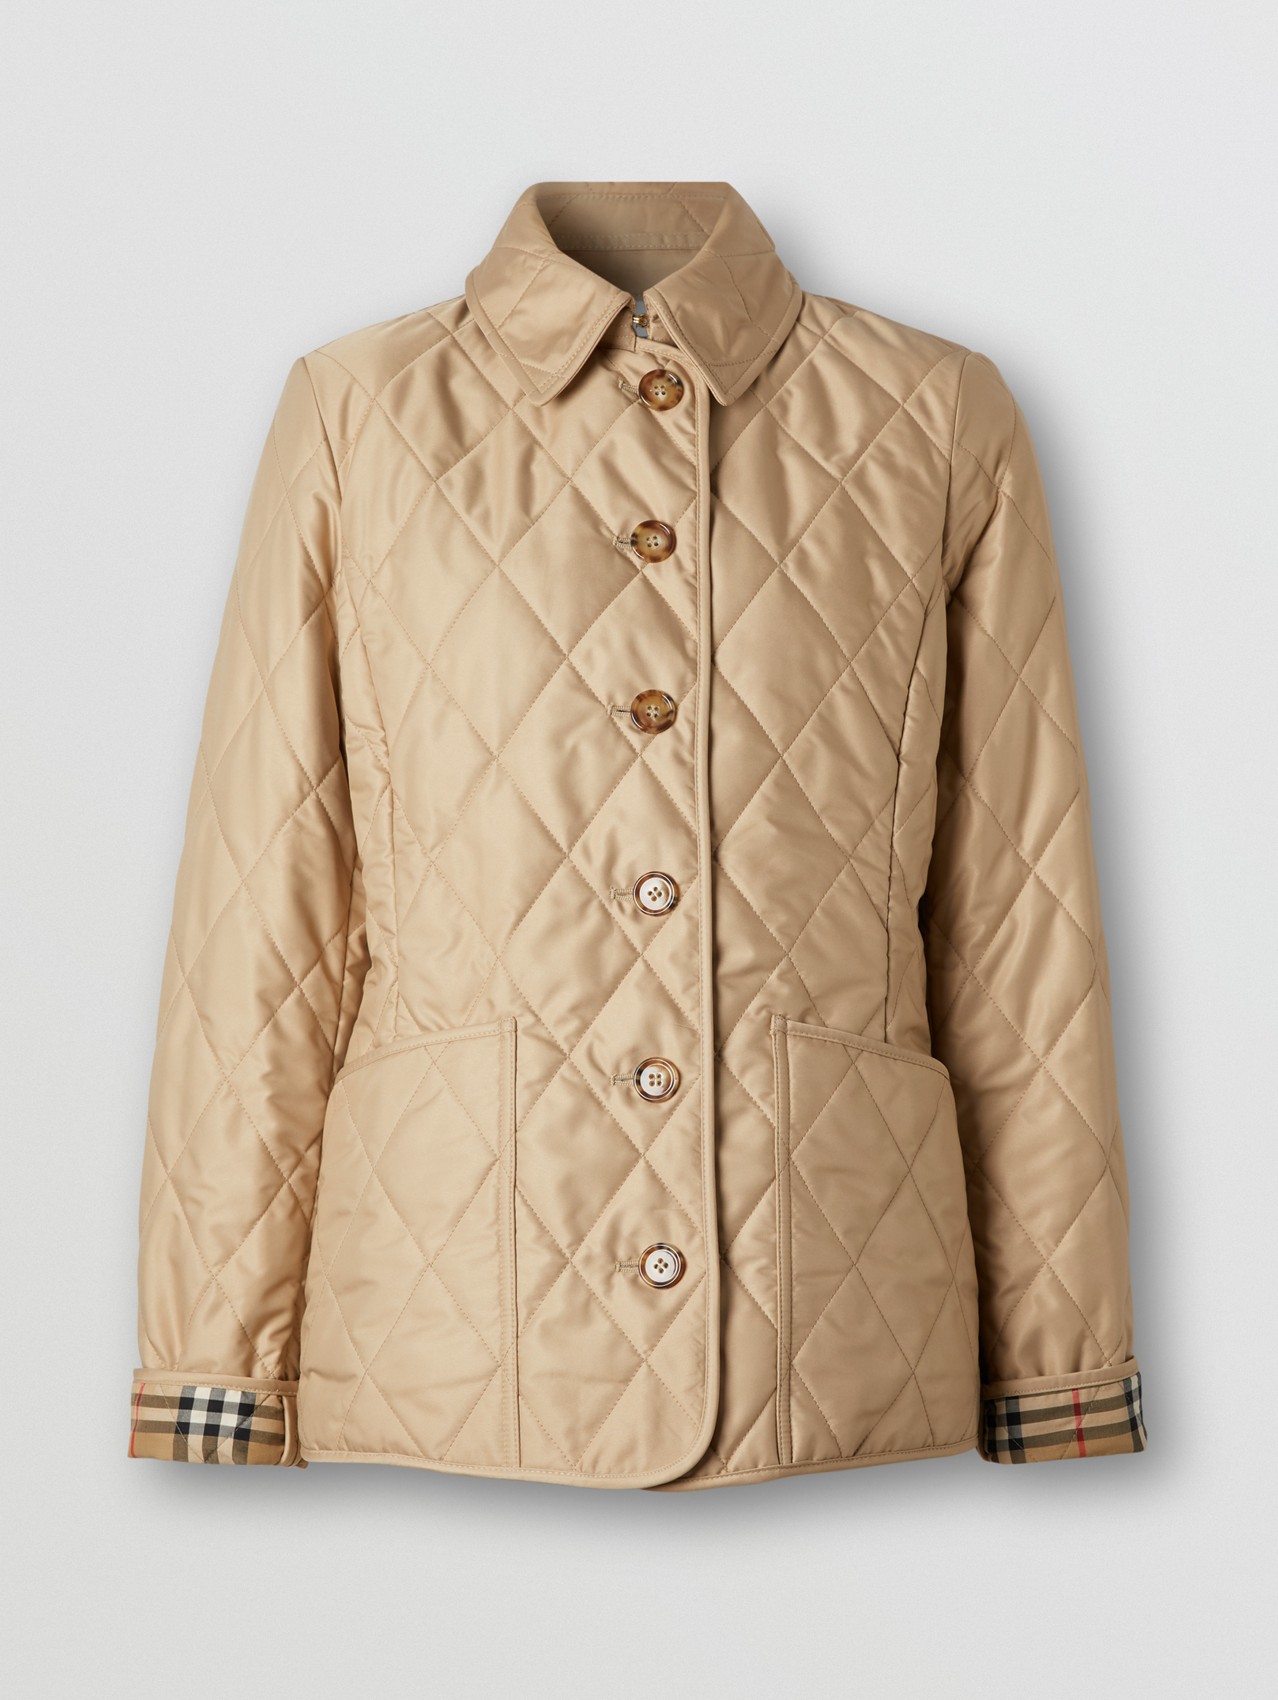 Diamond Quilted Thermoregulated Jacket in New Chino